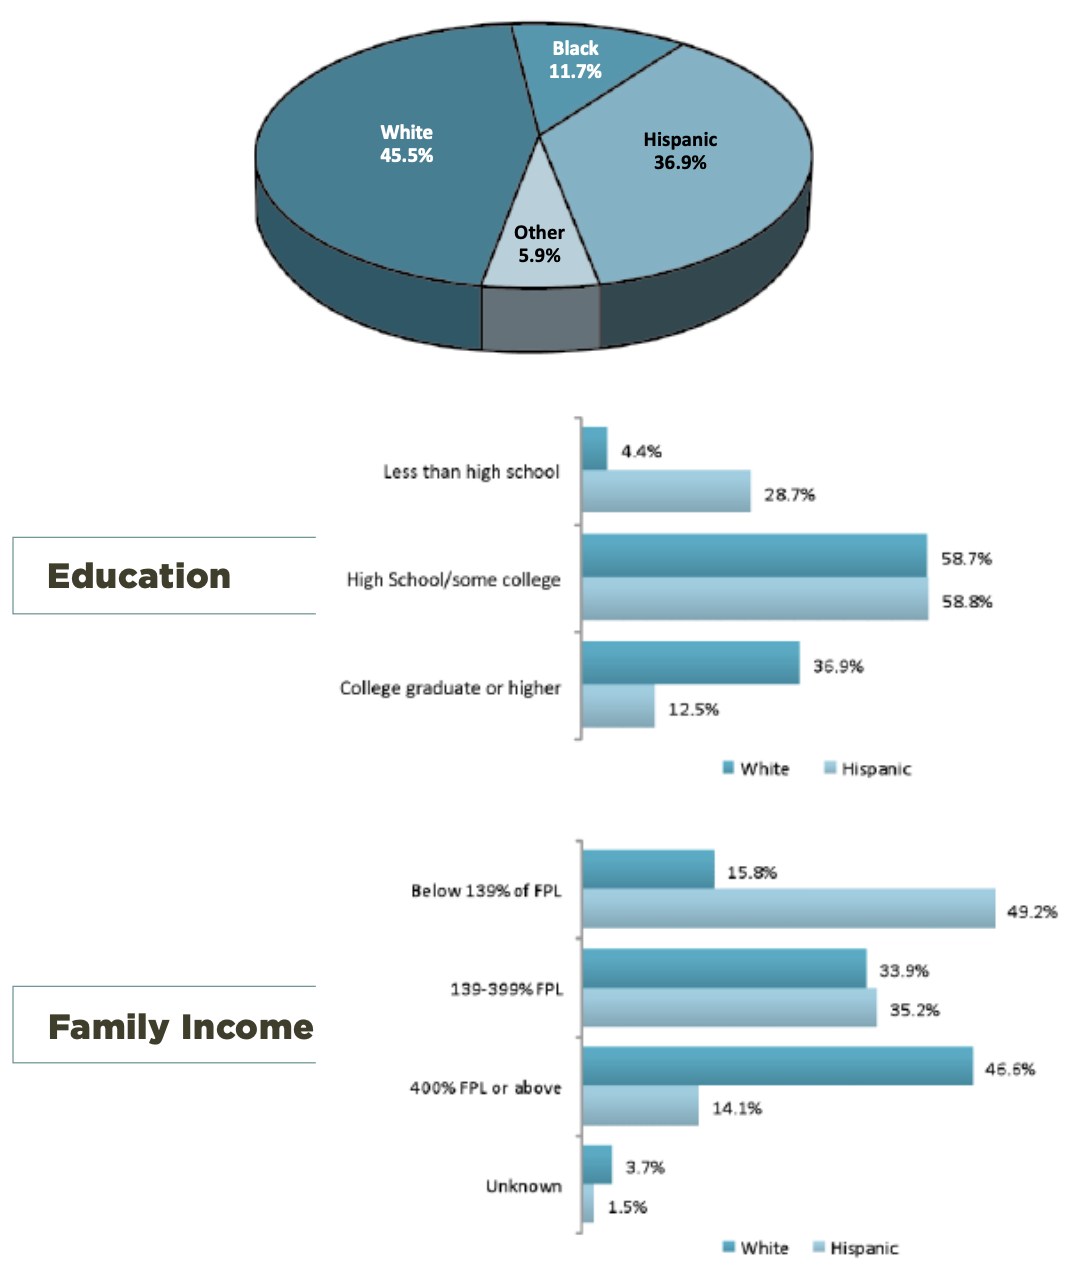 These graphs display the characteristics (race, education, and family income) of survey participants.